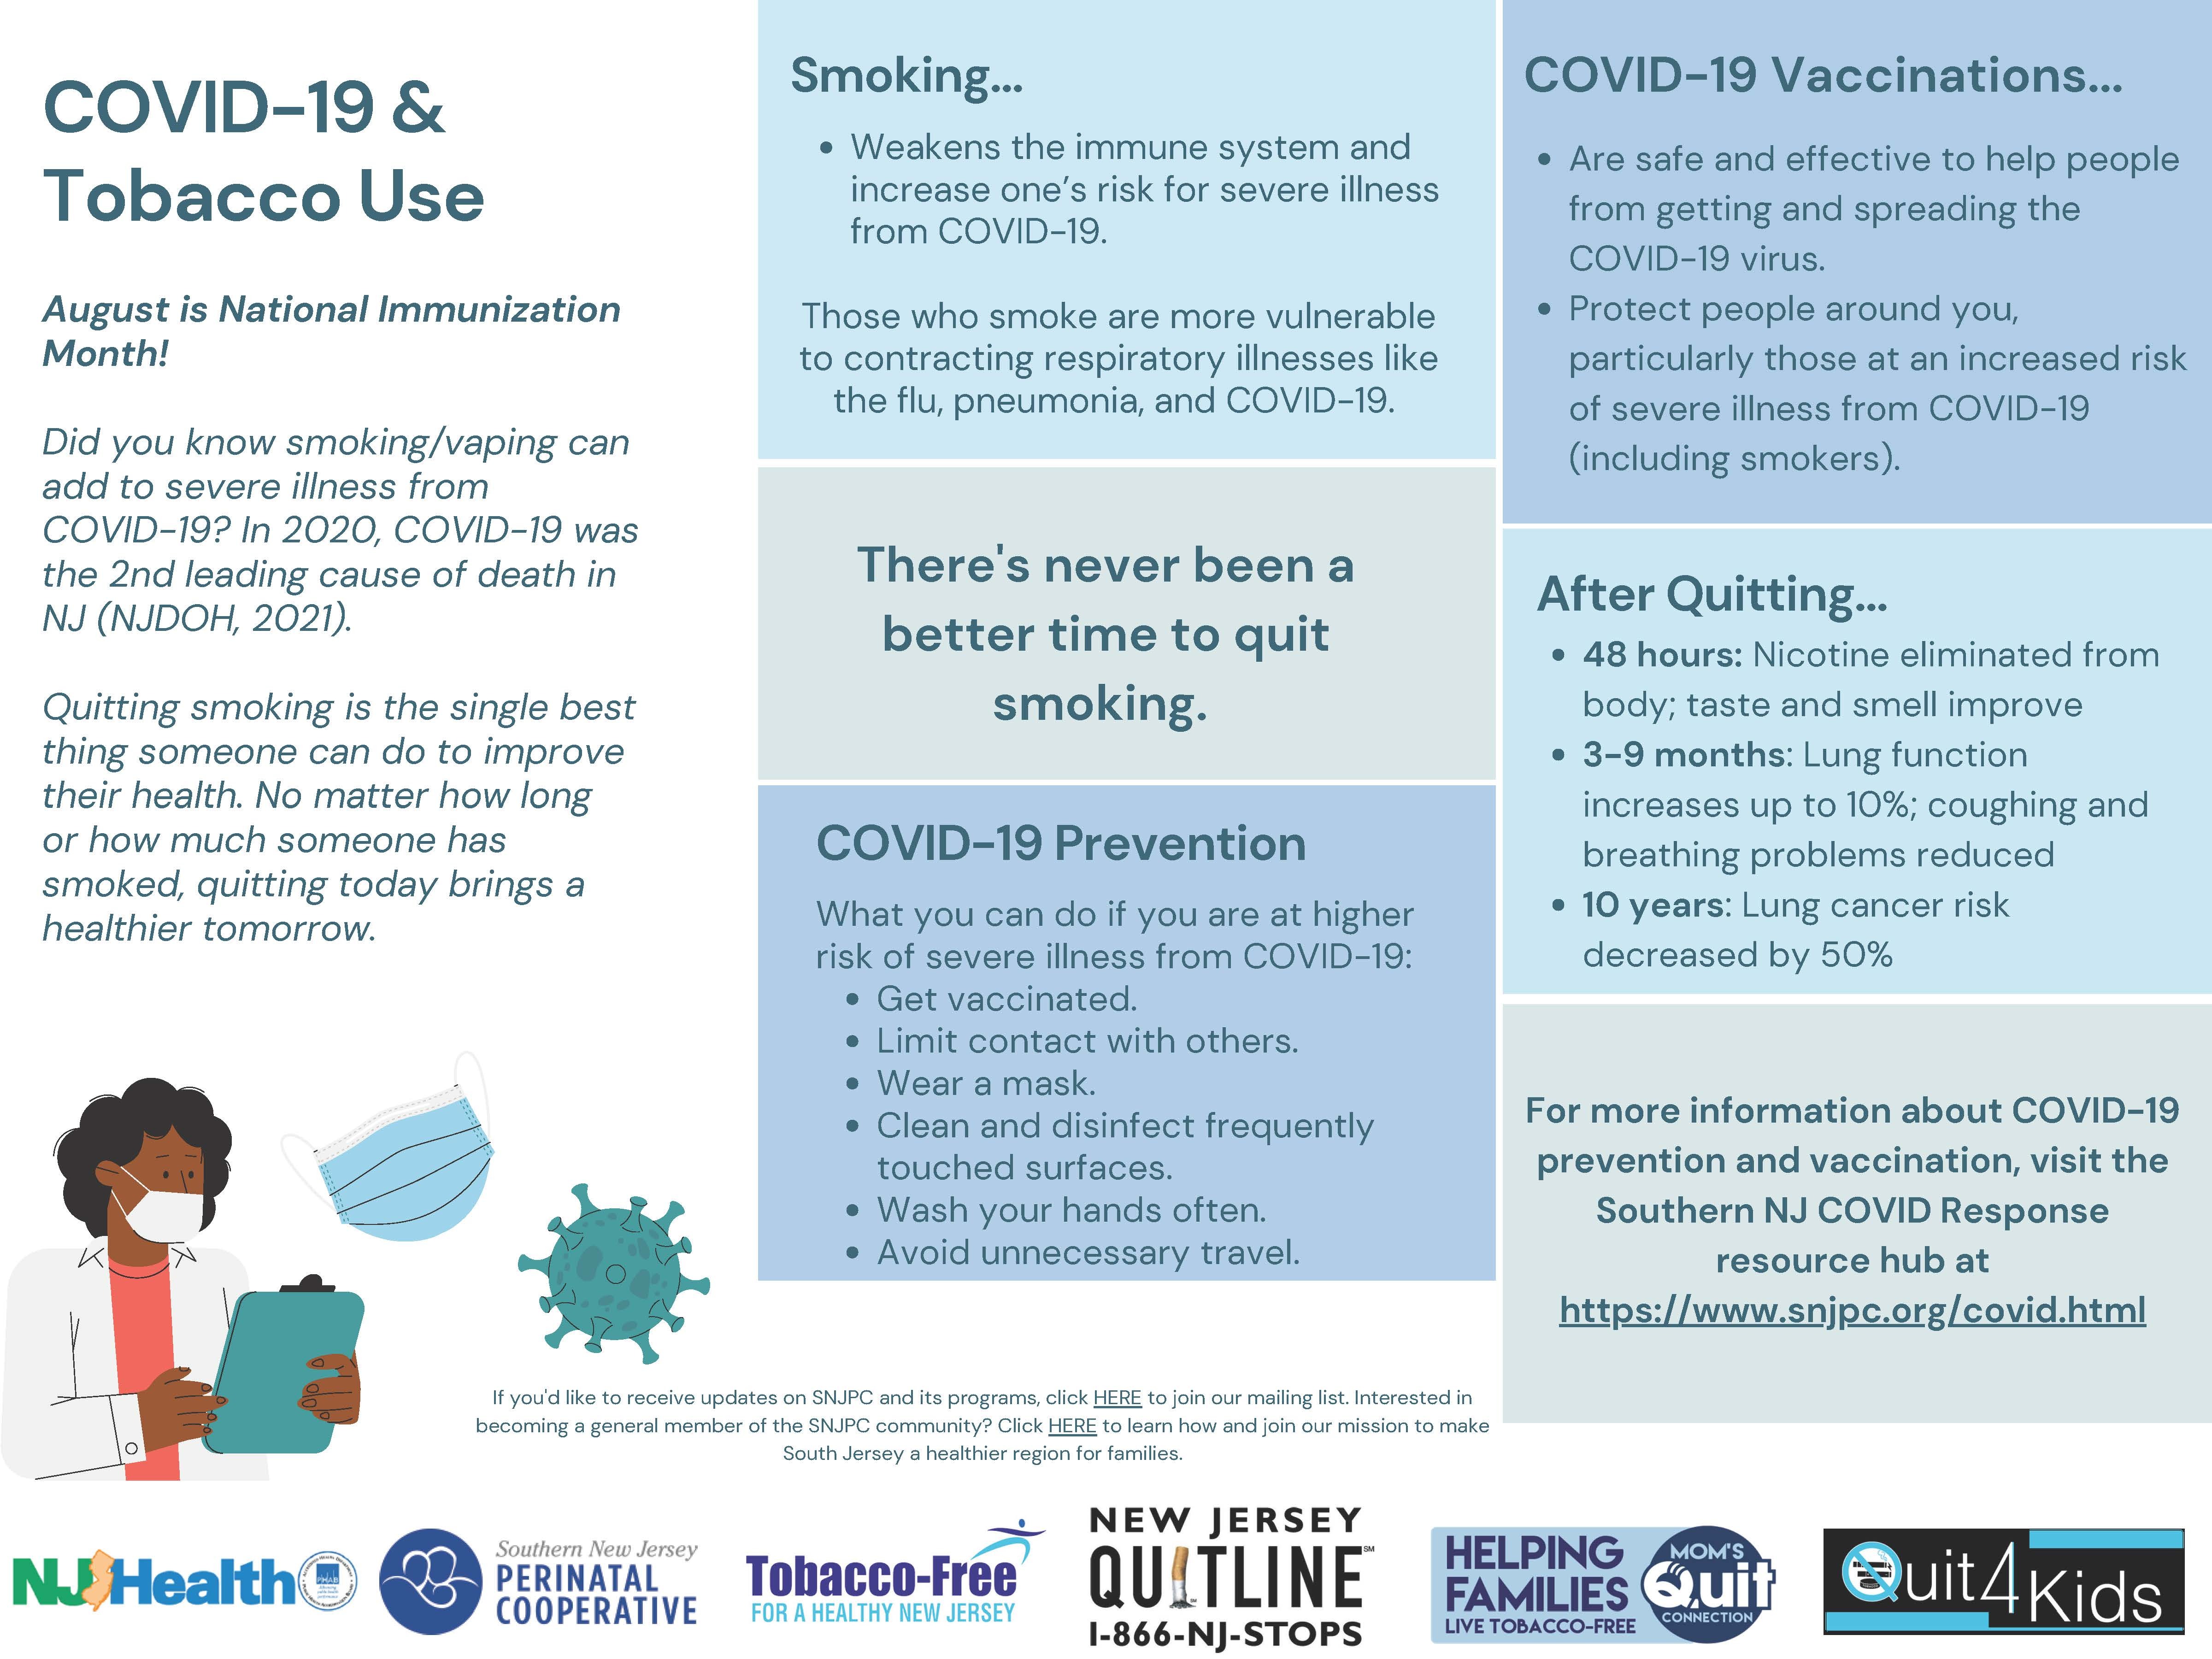 COVID-19 and Tobacco Use Infographic